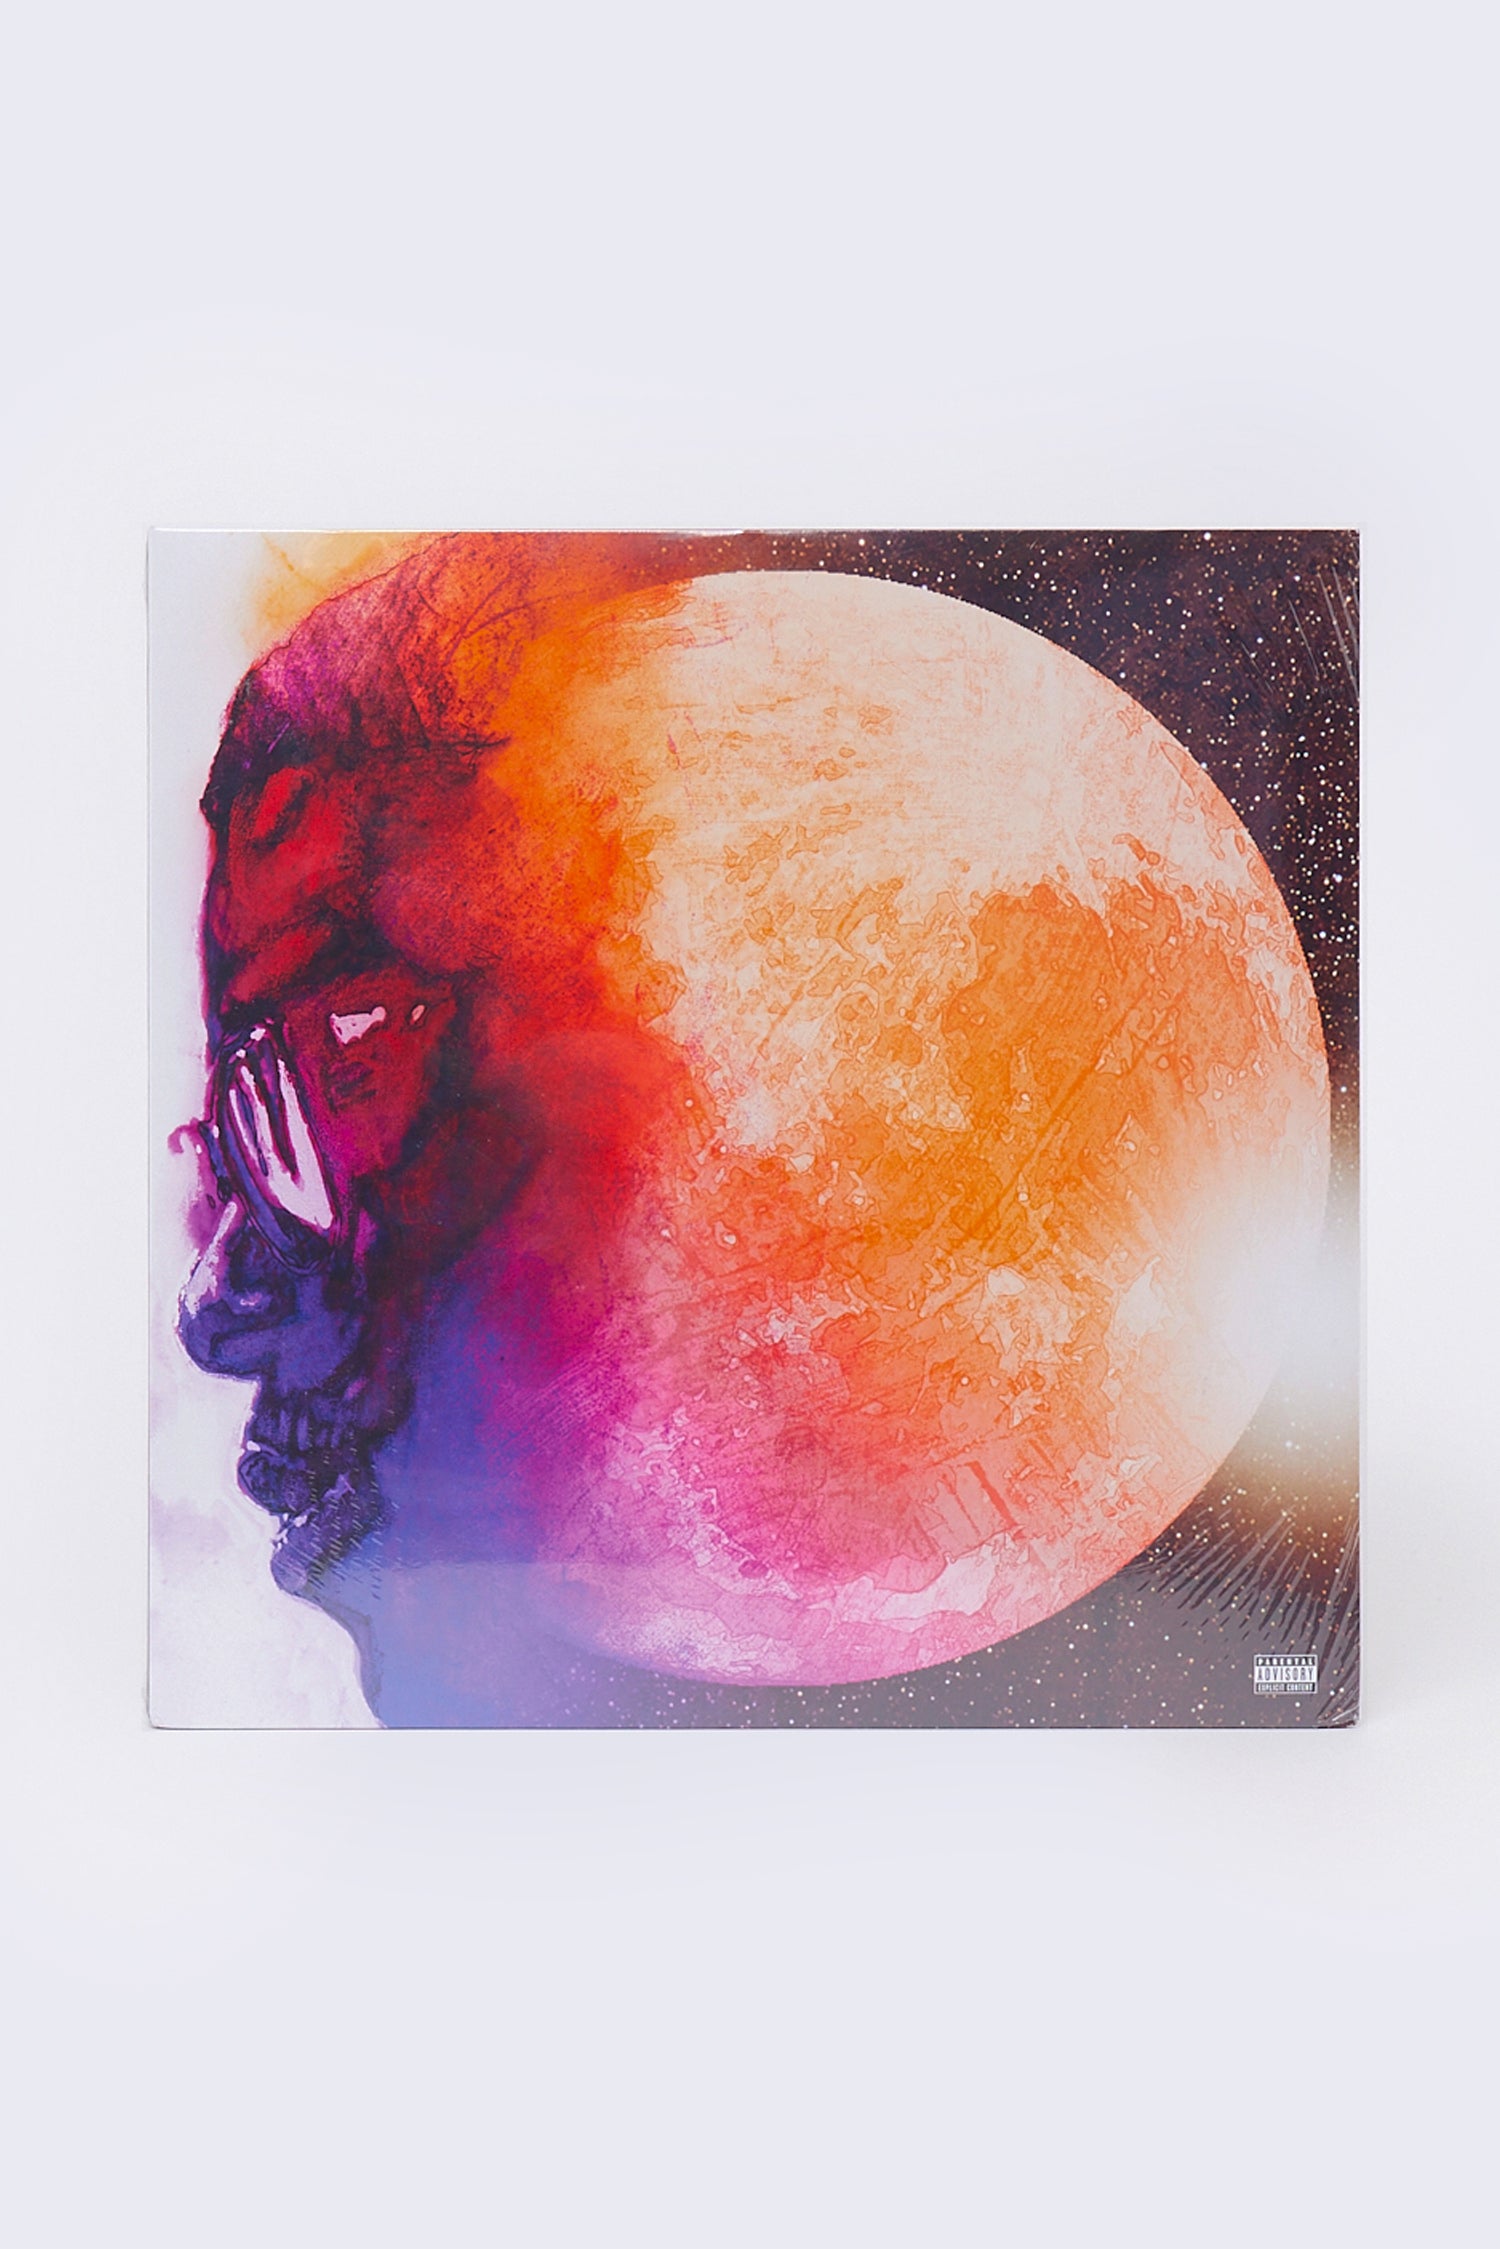 Kid Cudi - Man On The Moon : The End Of Day